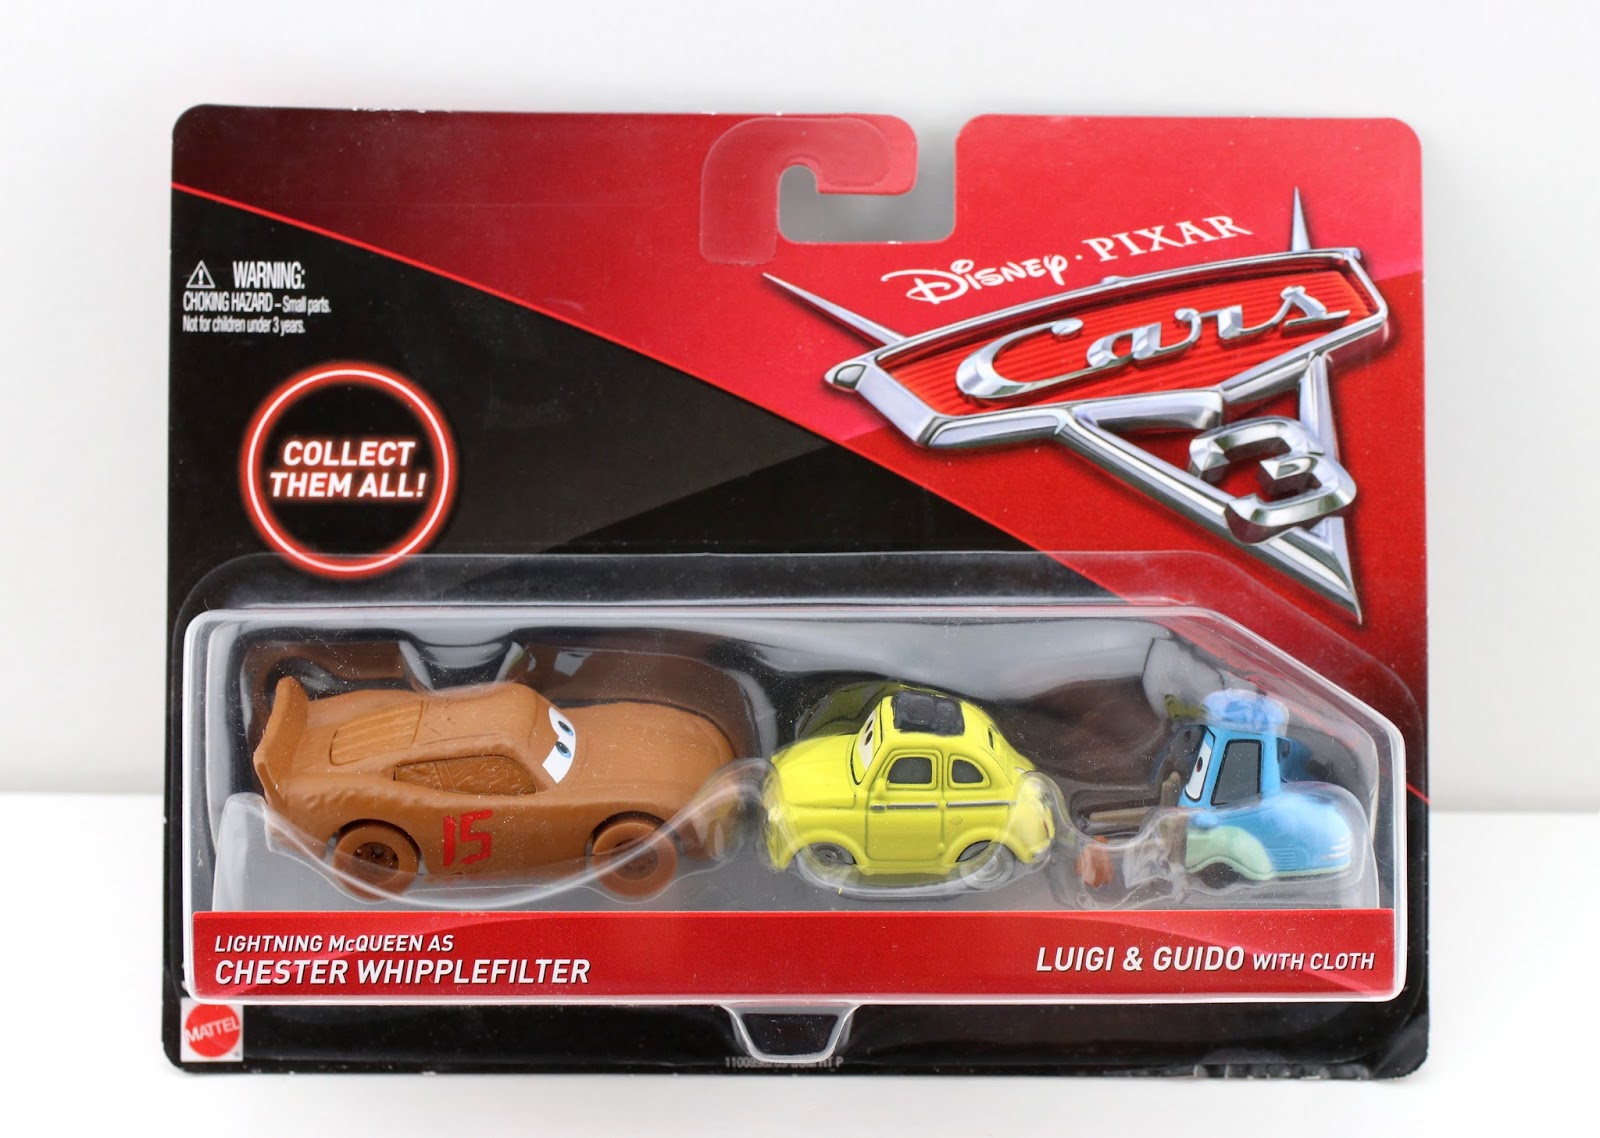 Cars 3: Lightning McQueen as Chester Whipplefilter, Luigi & Guido with Cloth (3-Pack)